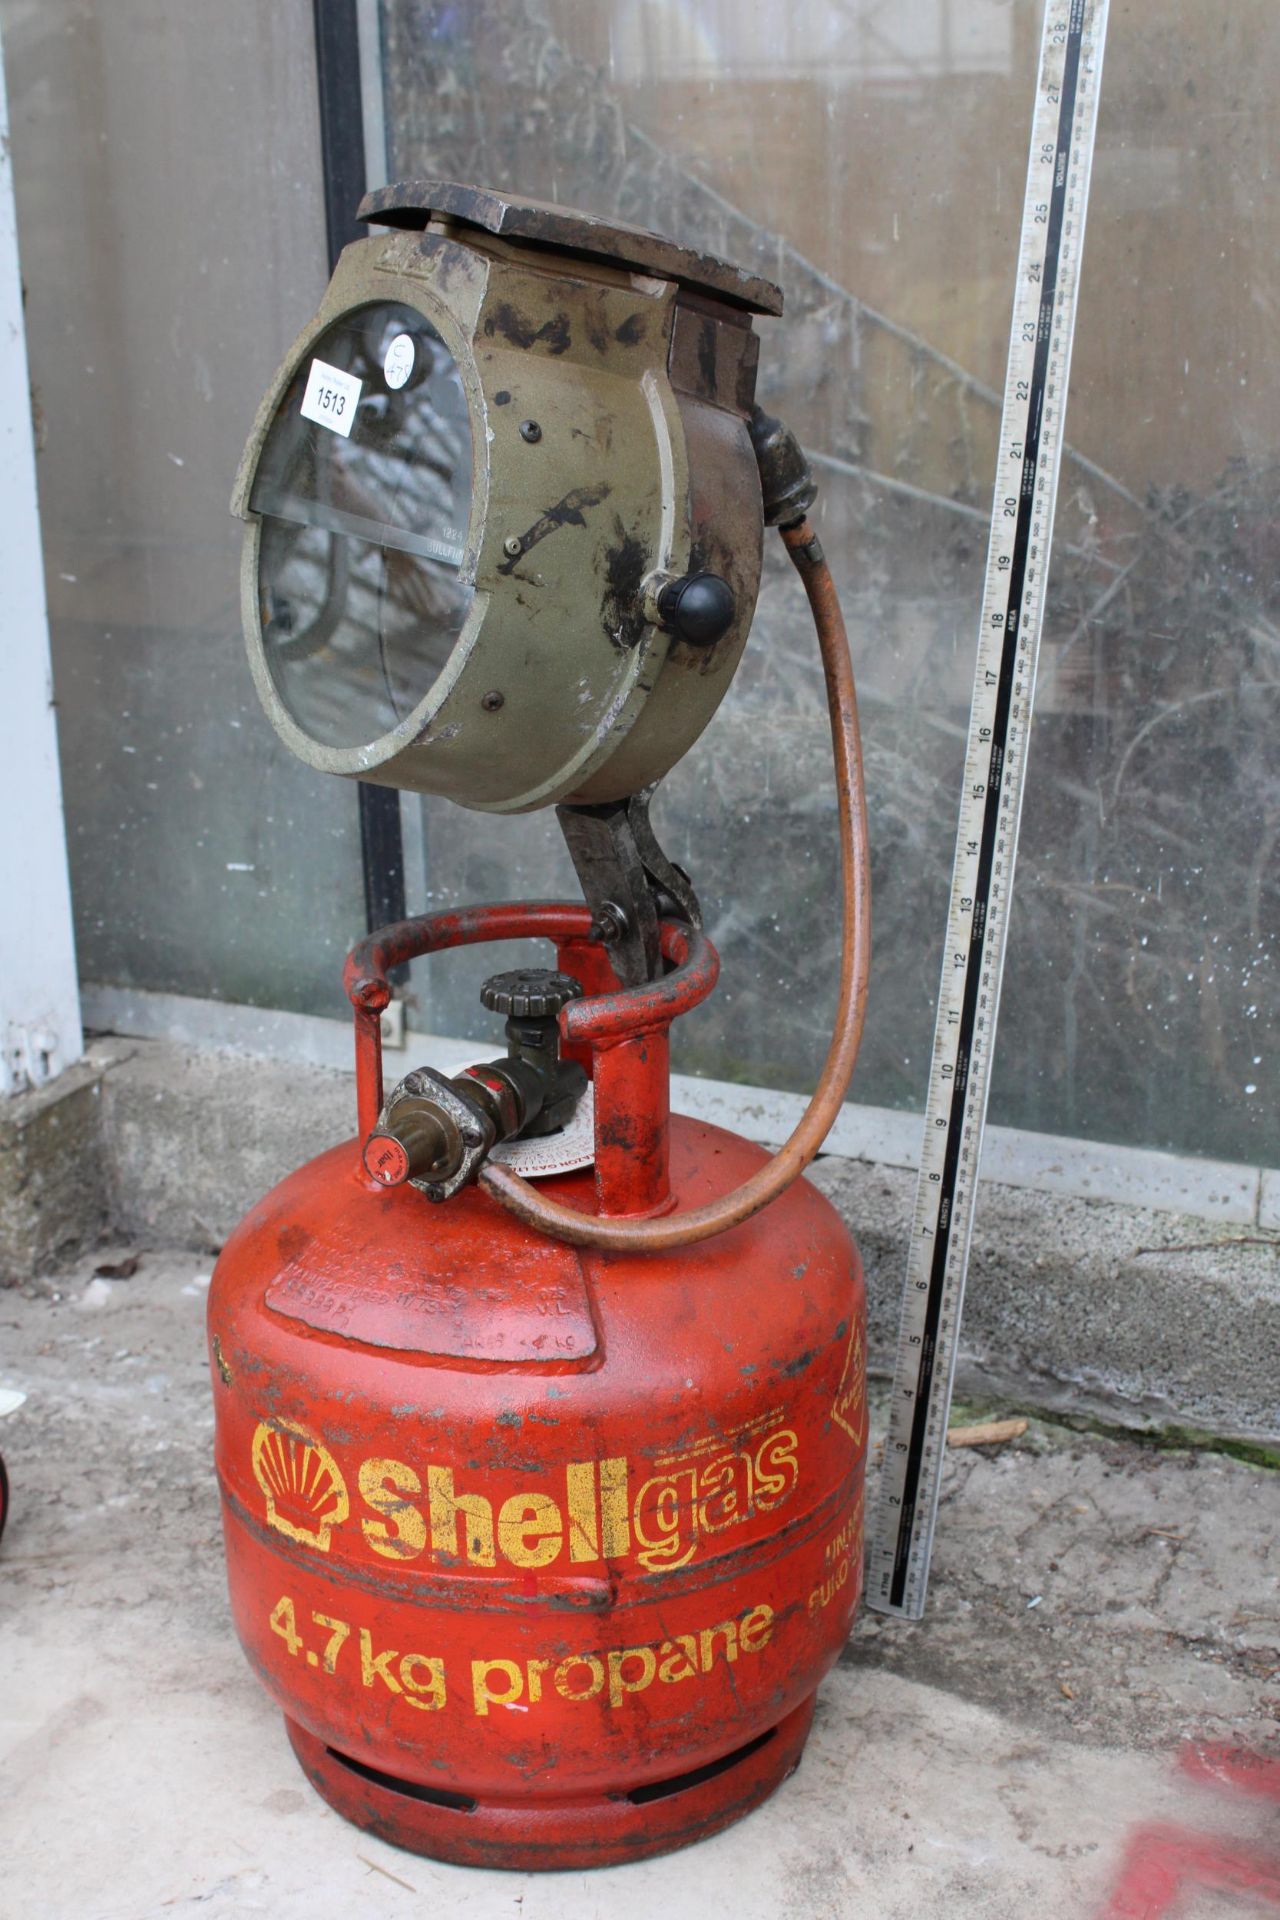 A VINTAGE BULLFINCH LIGHT WITH SHELL GAS BOTTLE - Image 3 of 7